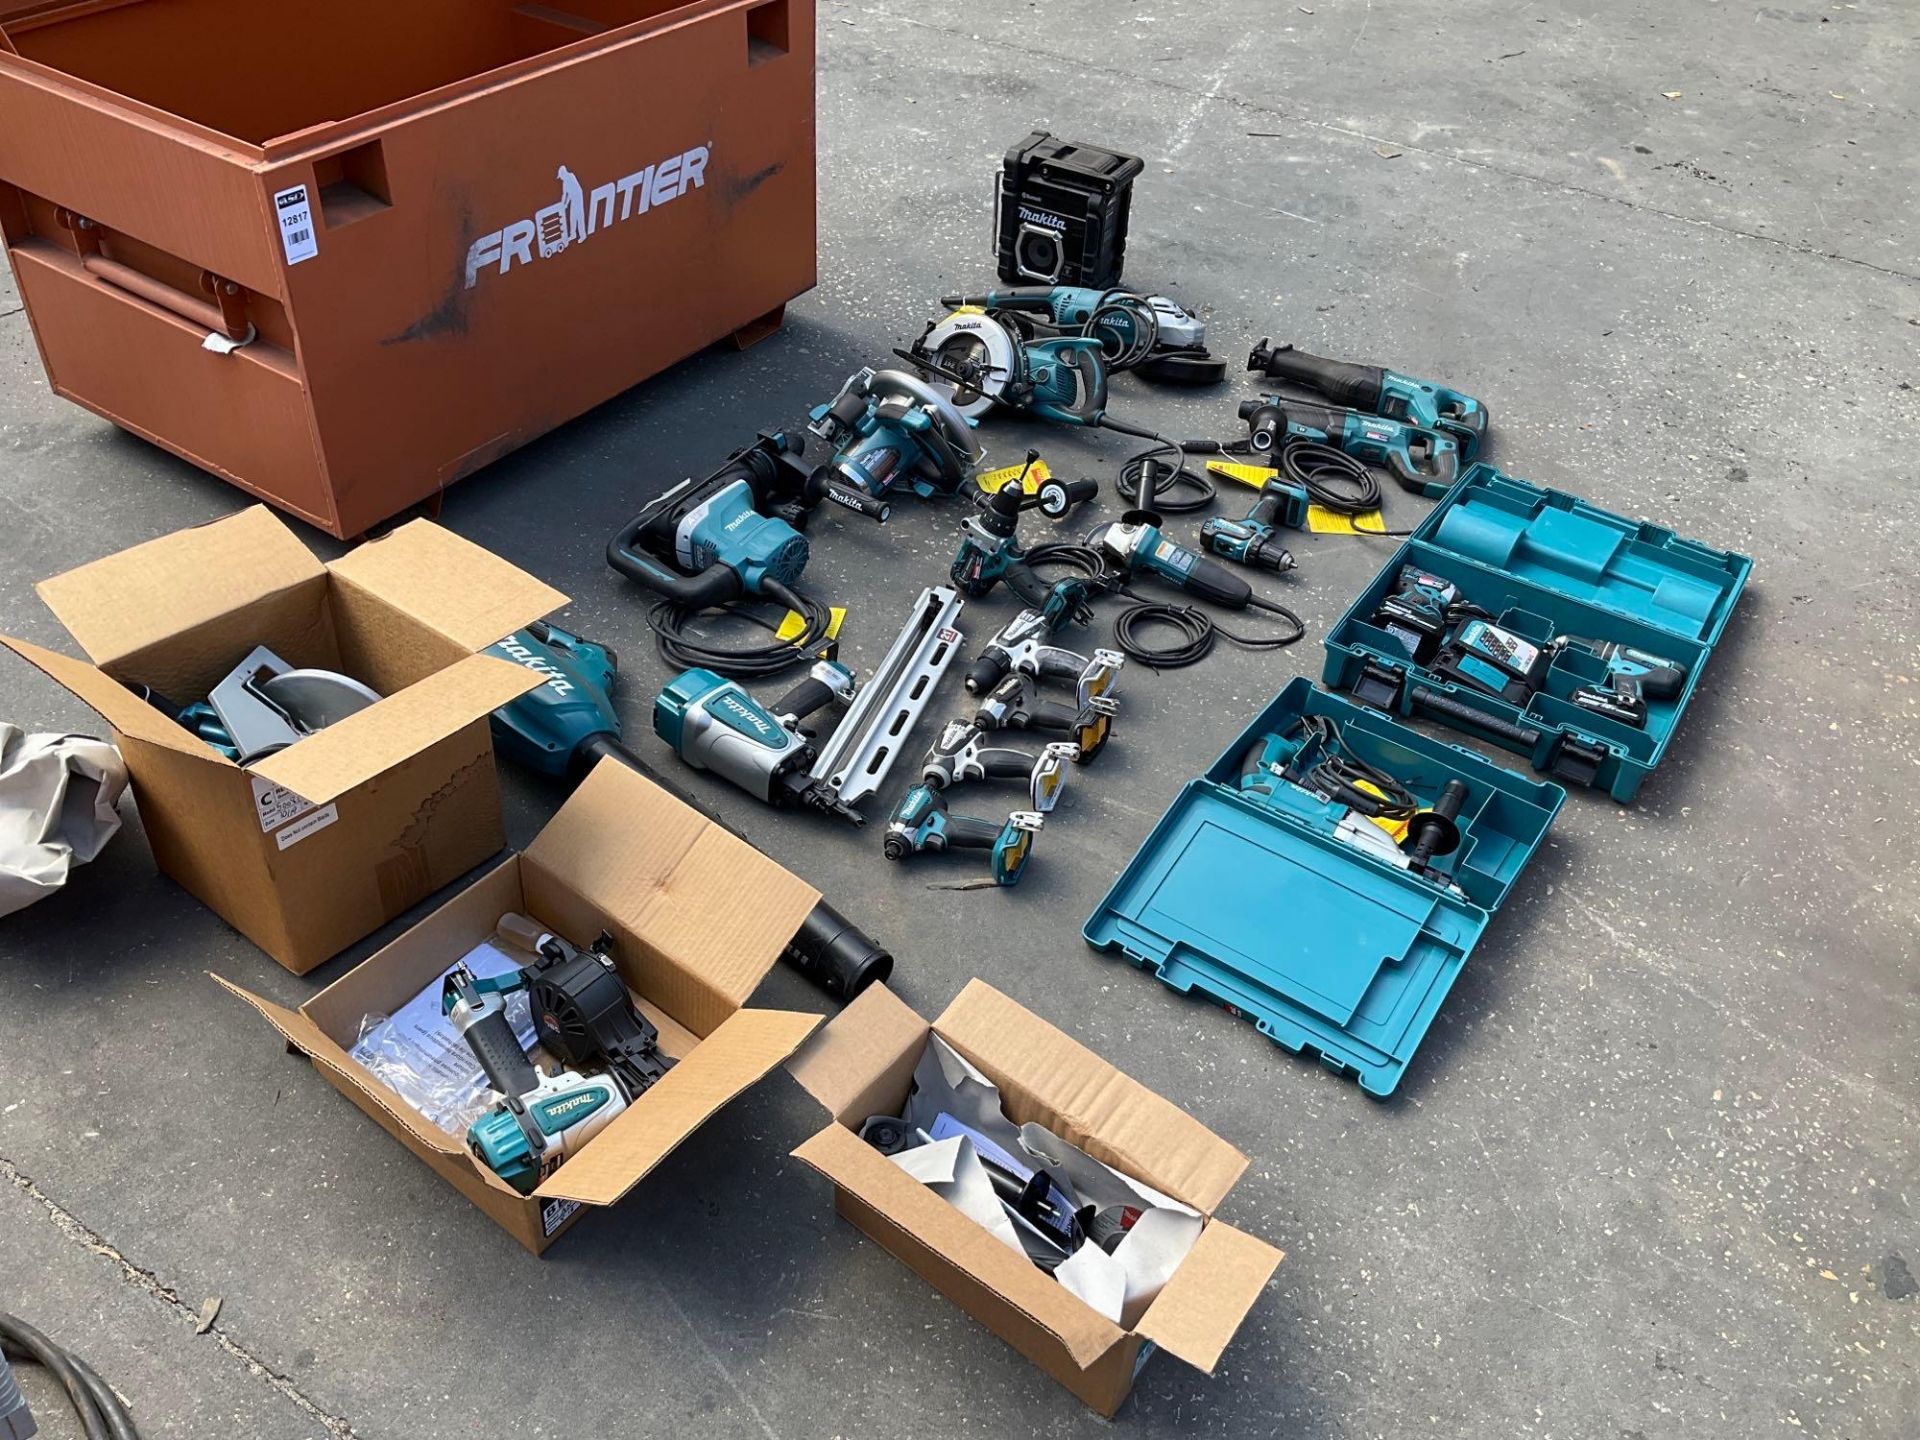 FRONTIER JOB BOX LOADED W/MAKITA TOOLS,( 22) MAKITA TOOLS INCLUDED, TOOLS RECONDITIONED